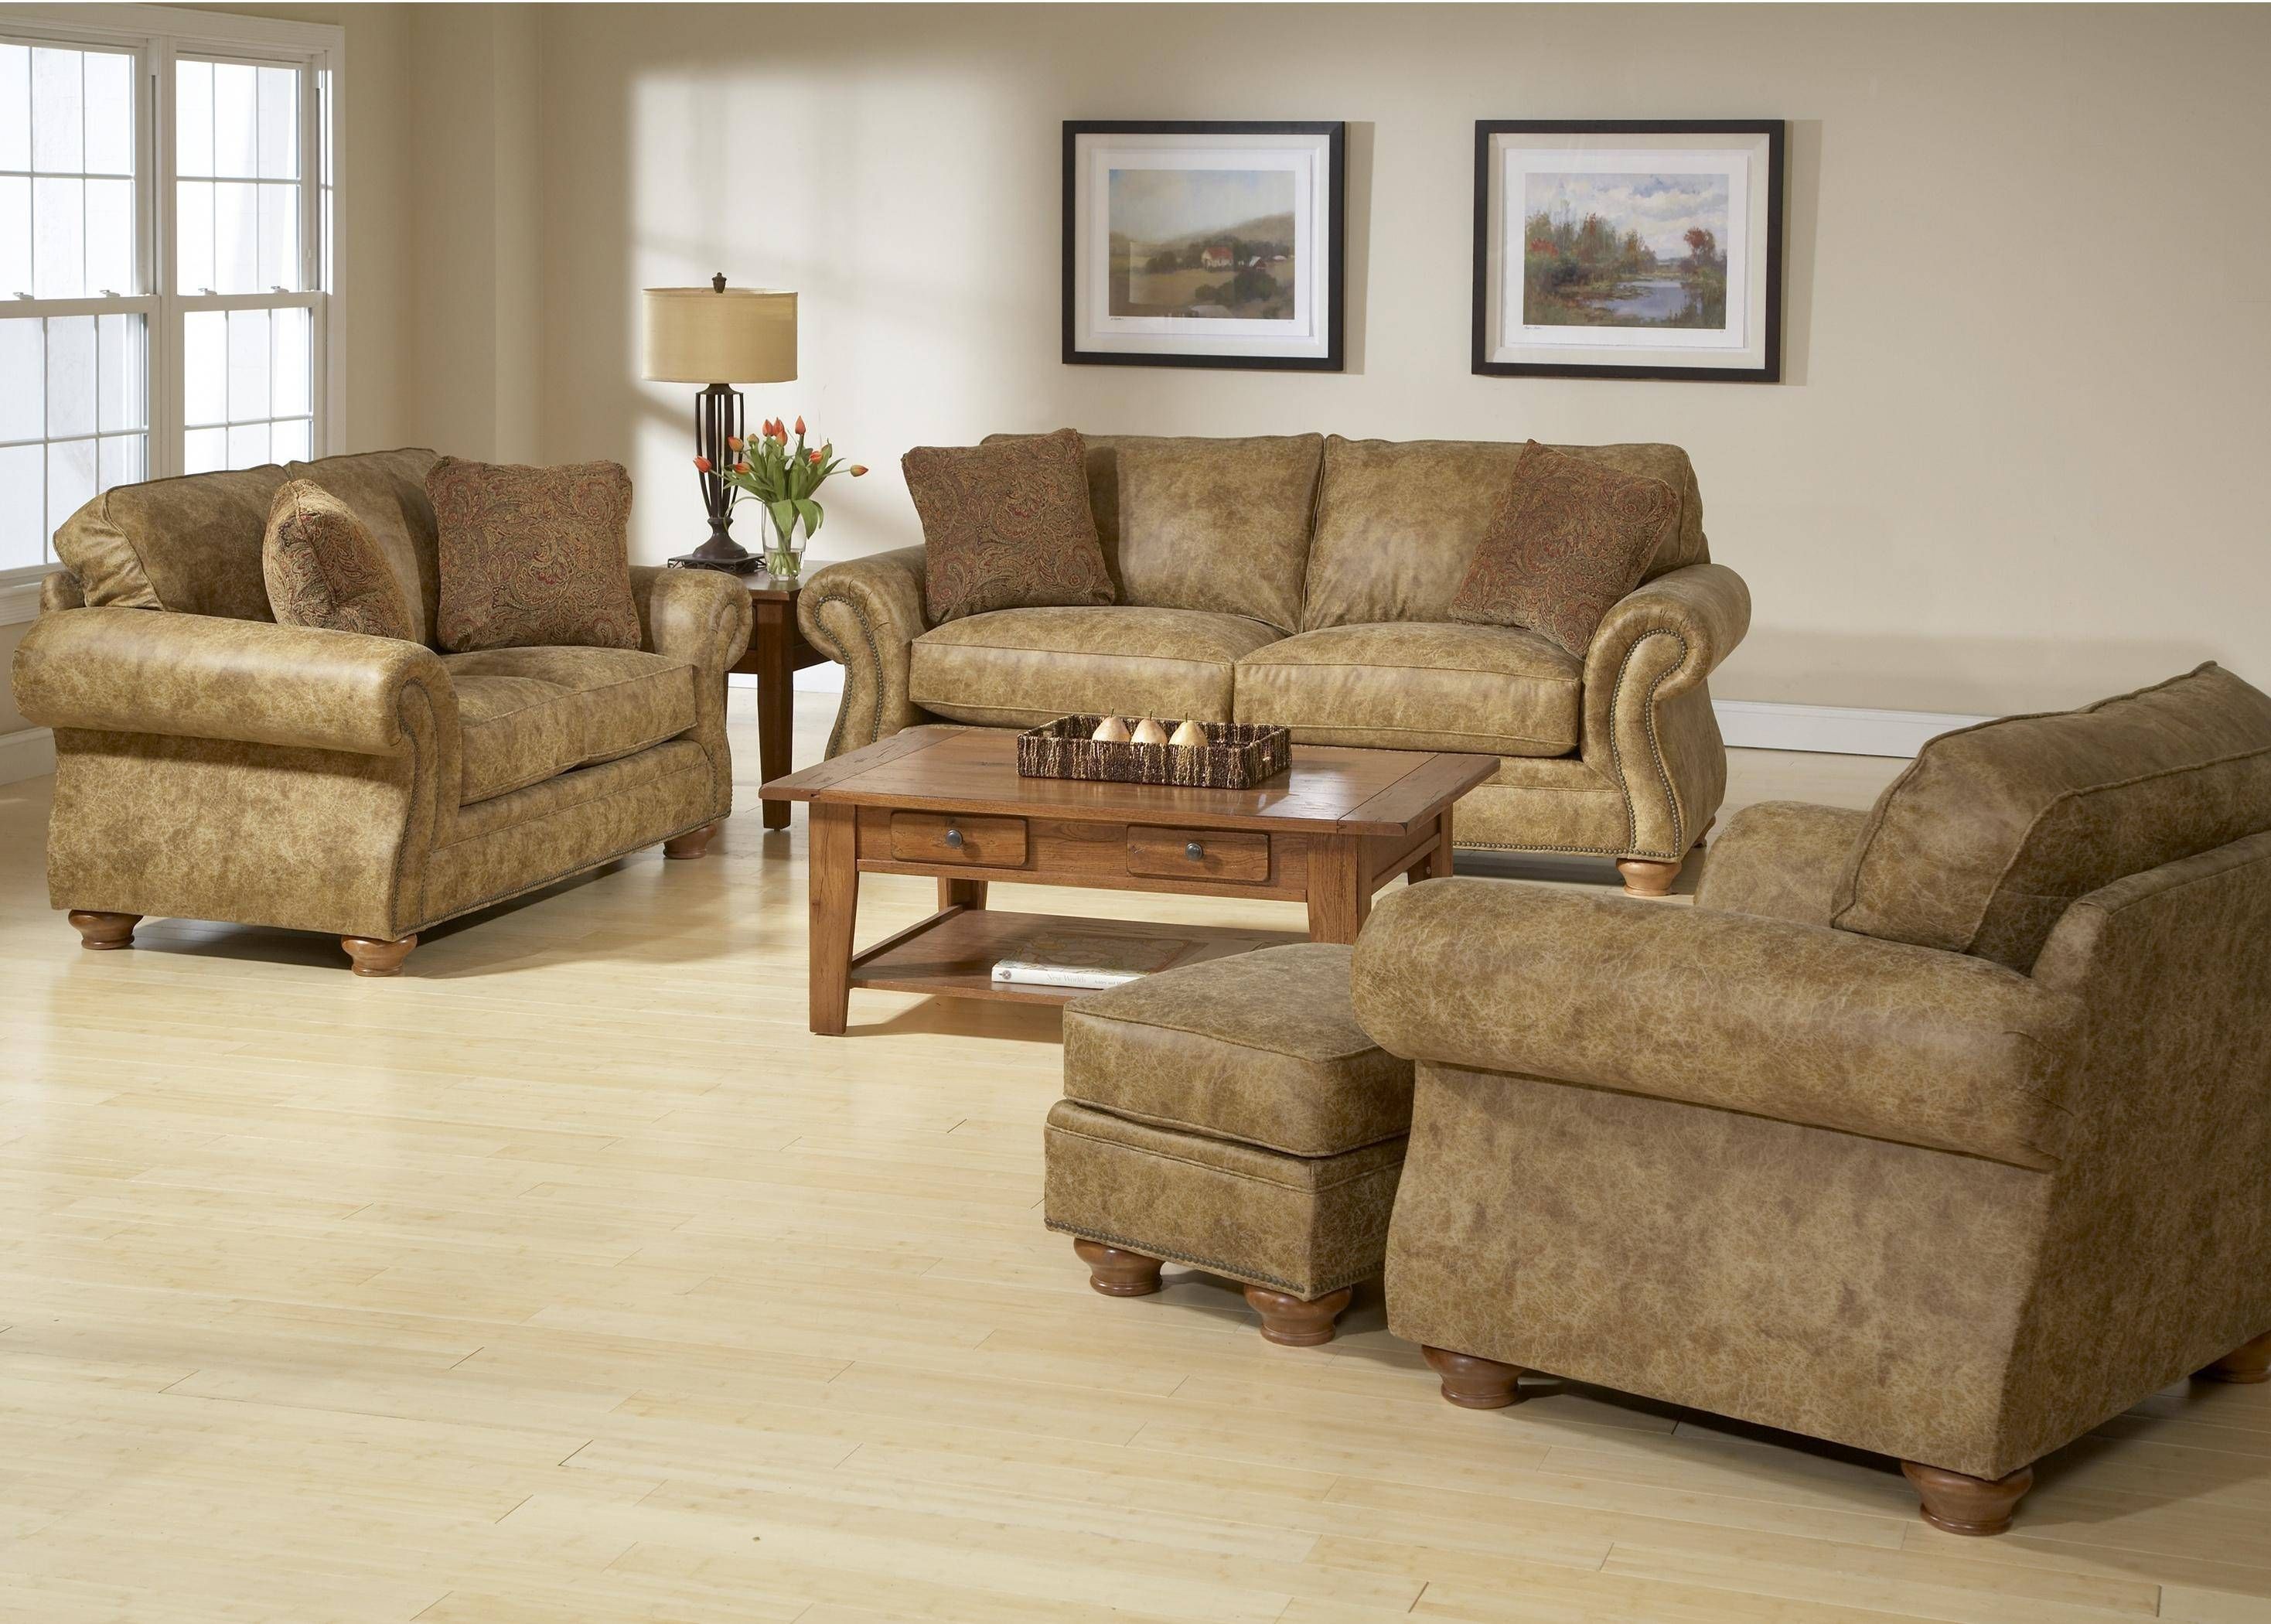 Broyhill Furniture Laramie Chair And Ottoman Set W/ Nail Head Trim Pertaining To Broyhill Sofas (View 9 of 15)